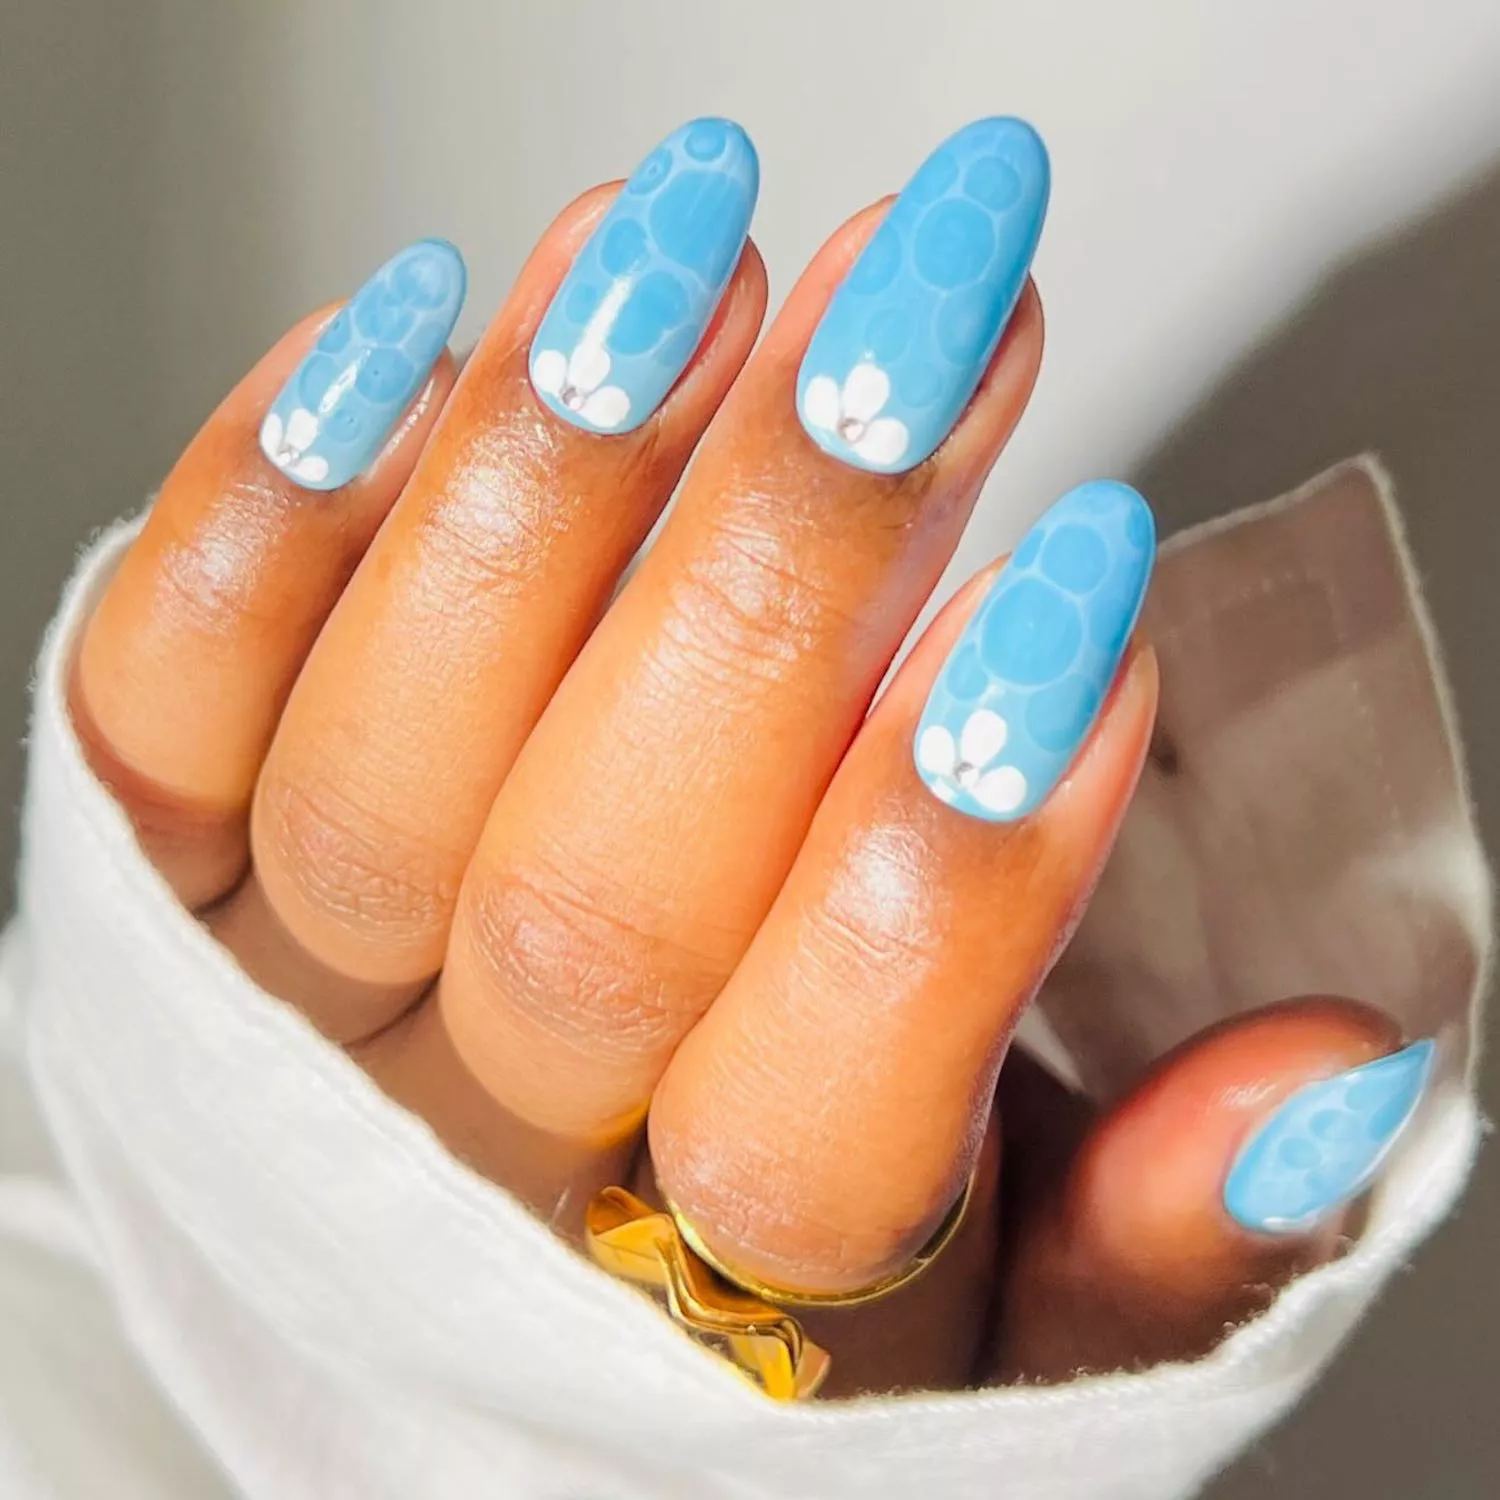 Light blue manicure with white and darker blue bubble designs and rhinestone accents